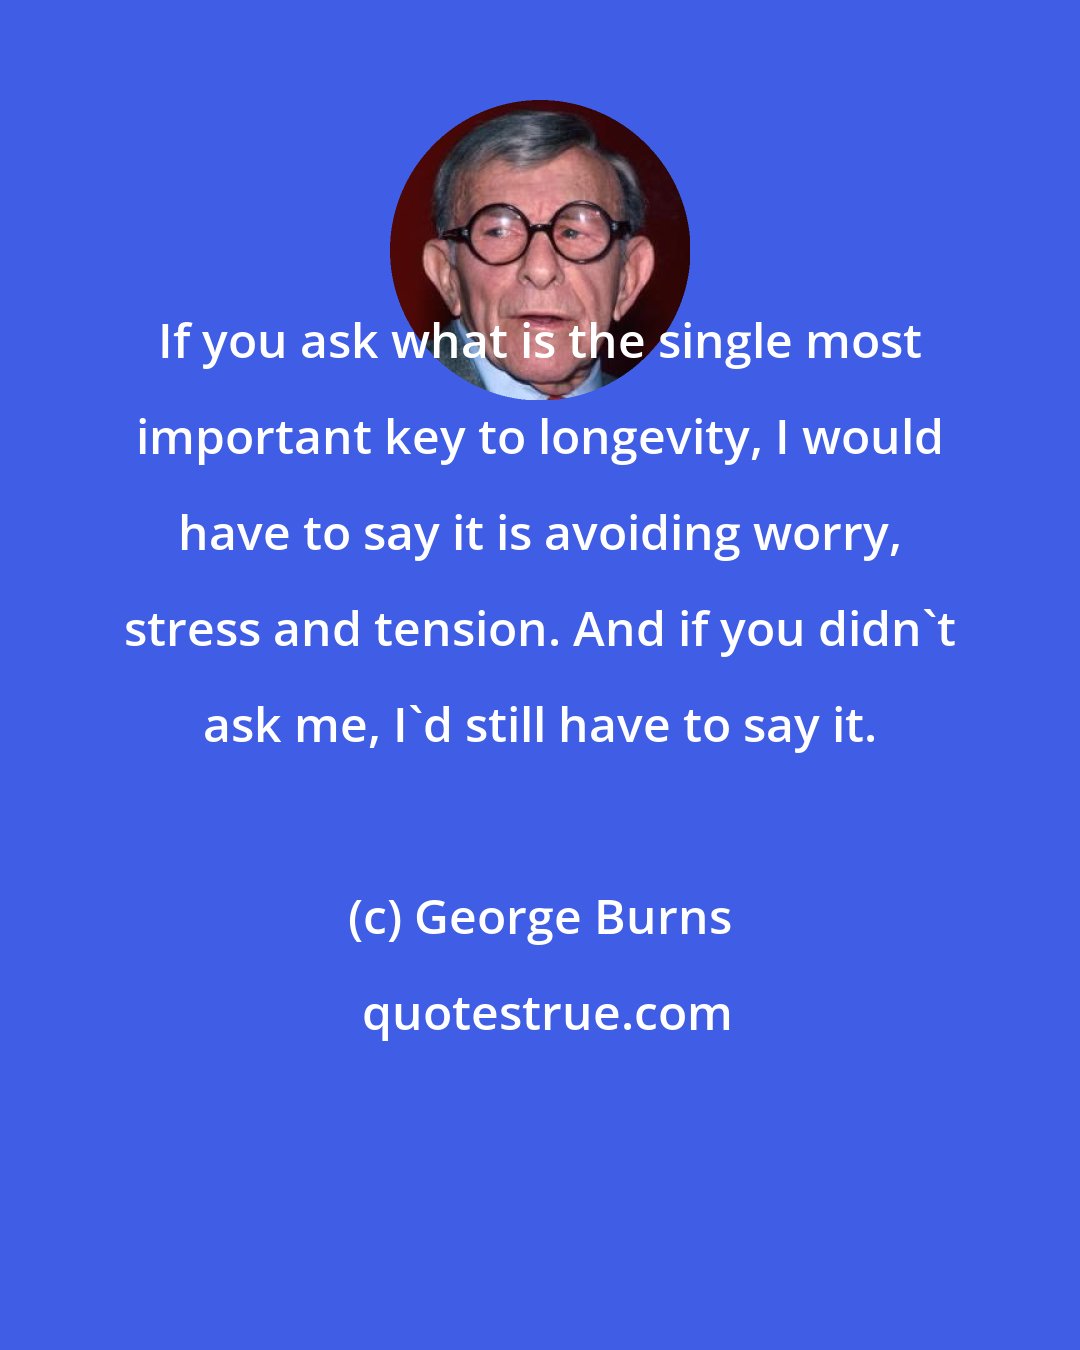 George Burns: If you ask what is the single most important key to longevity, I would have to say it is avoiding worry, stress and tension. And if you didn't ask me, I'd still have to say it.